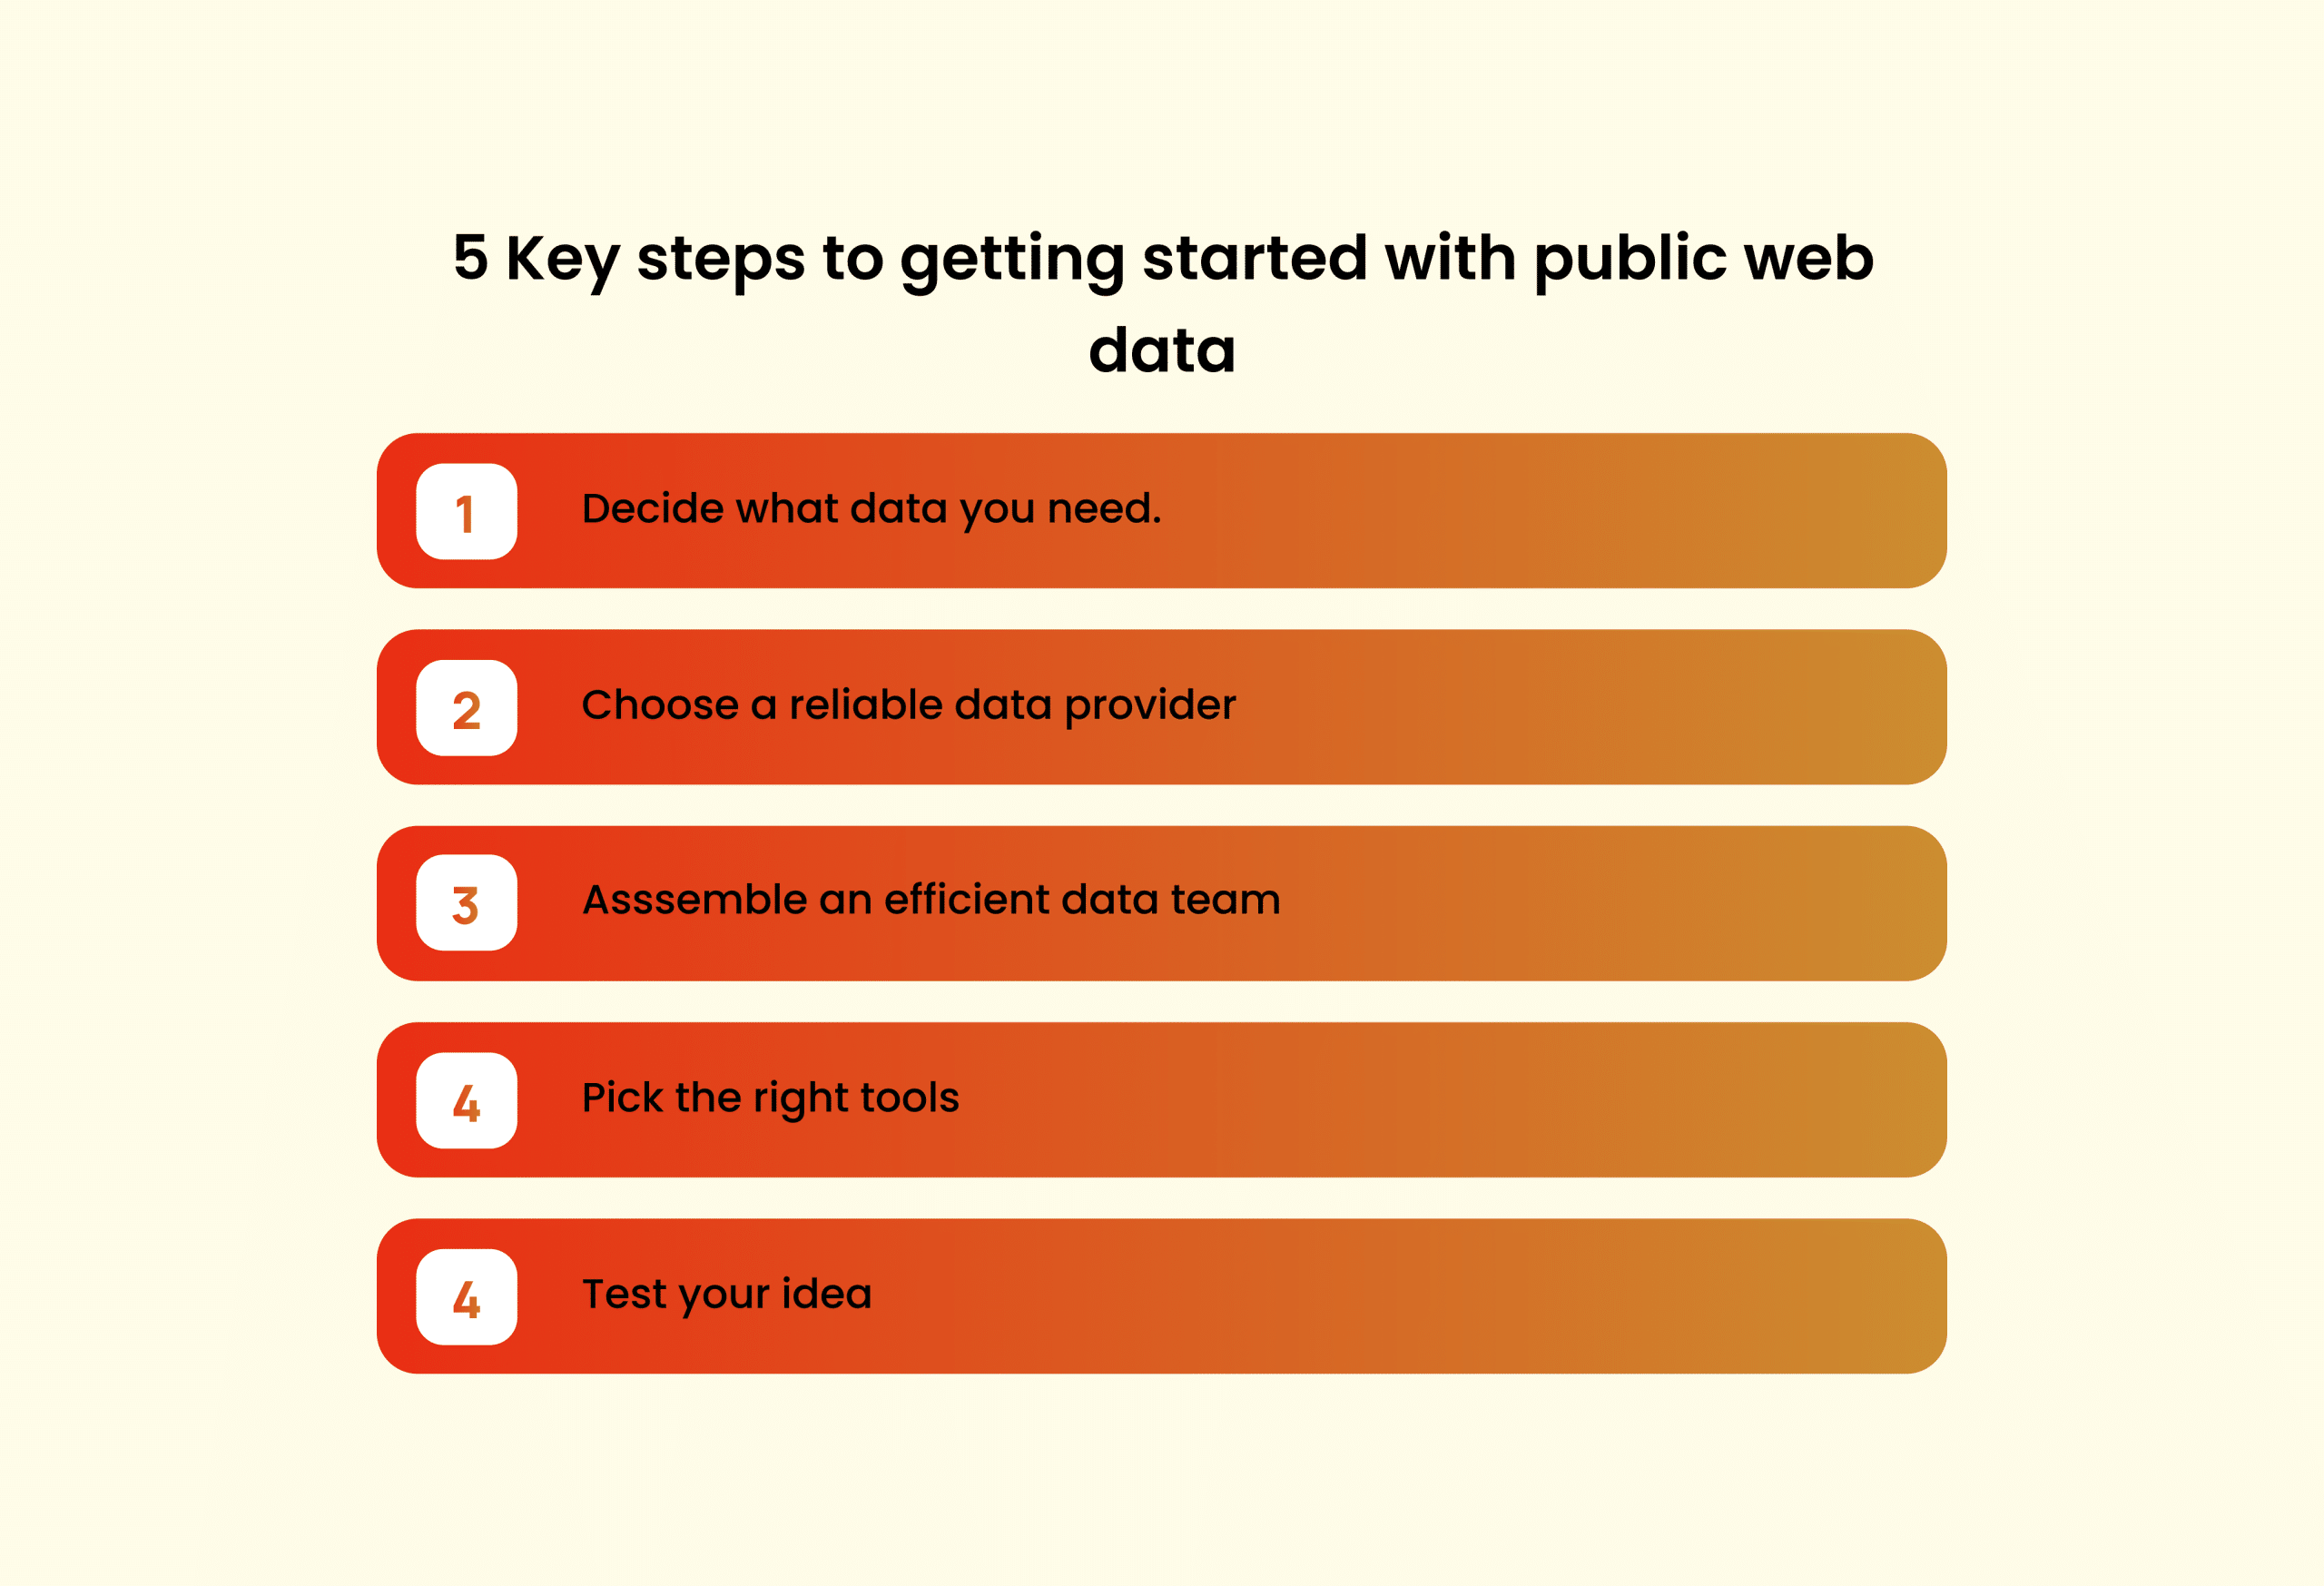 Getting Started with Public Web Data